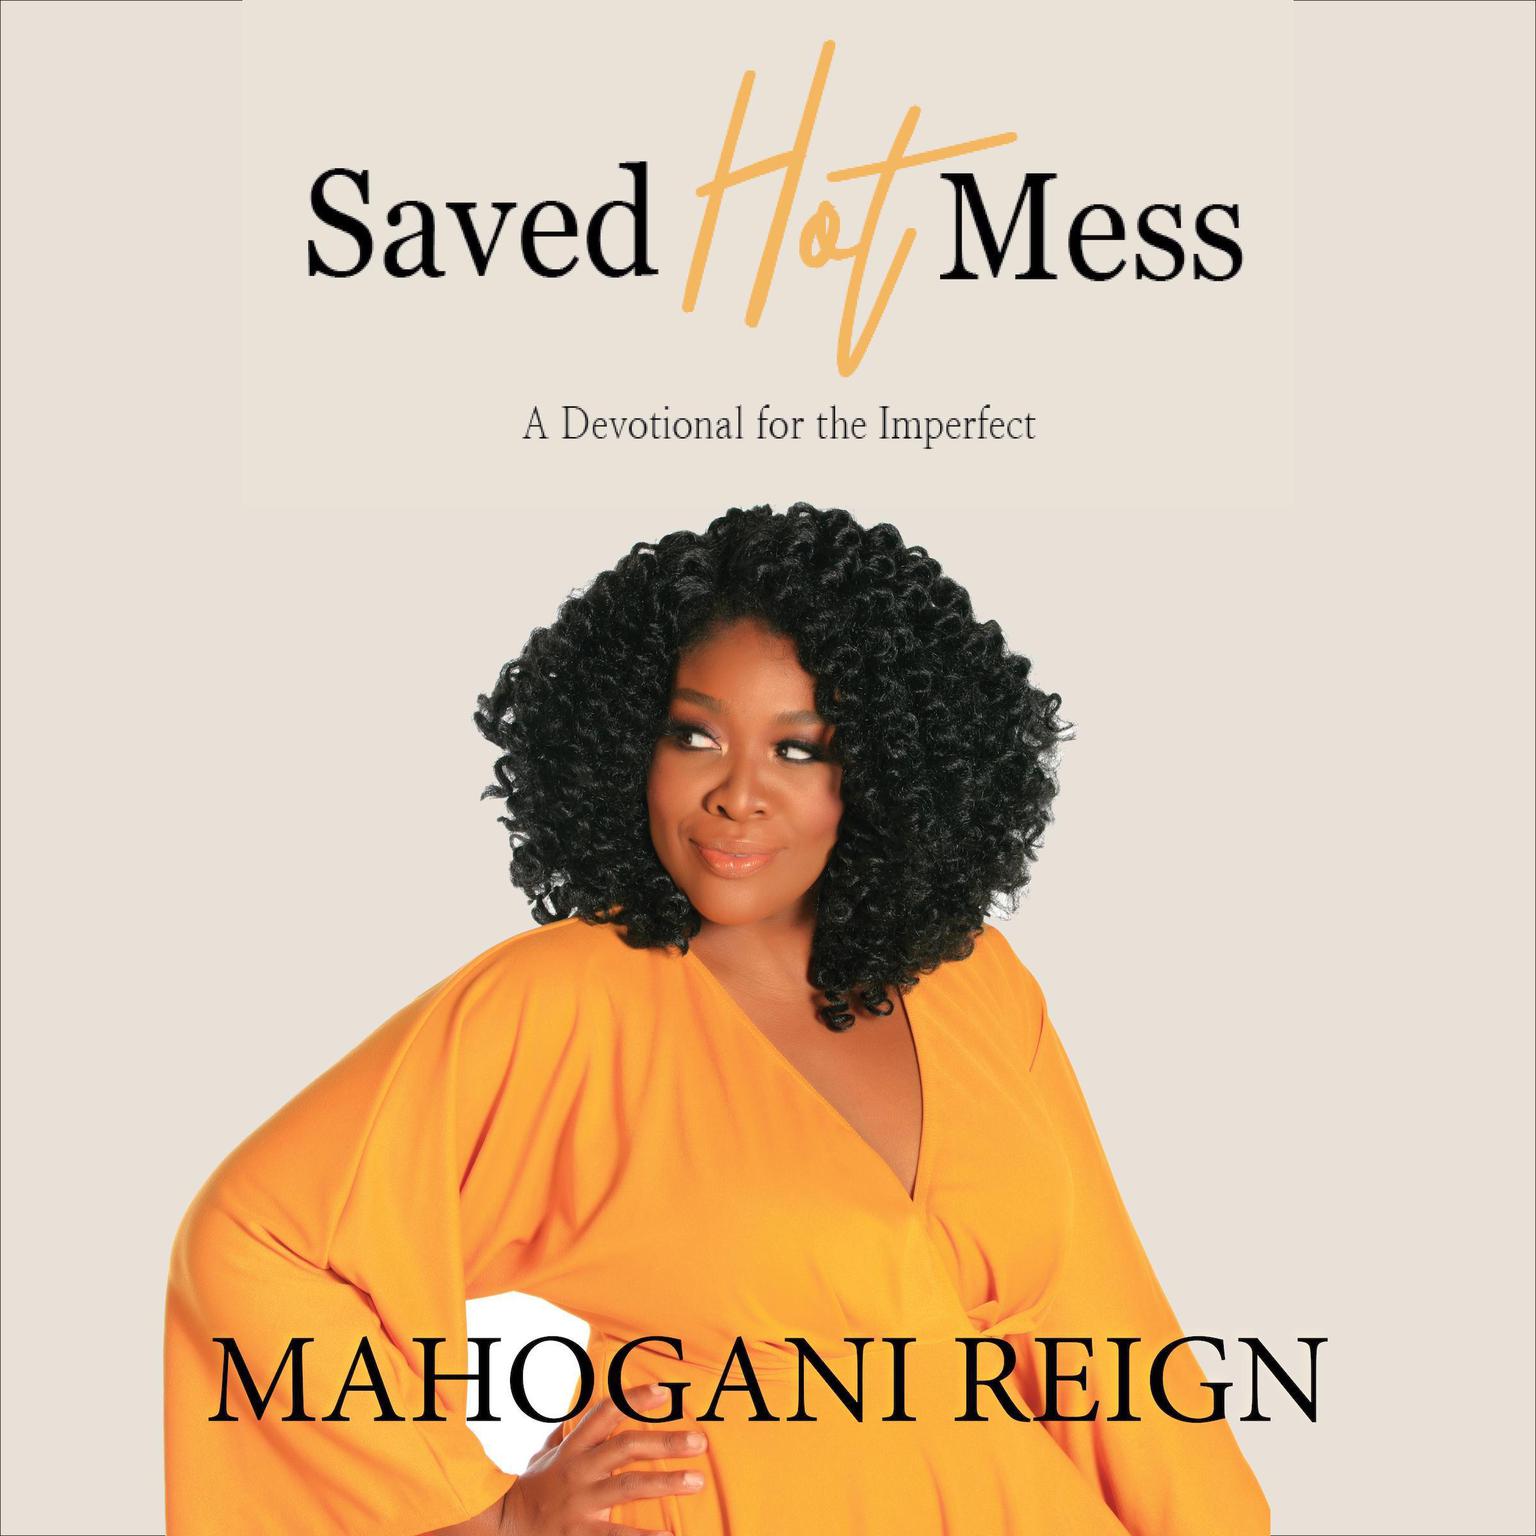 Saved Hot Mess: A Devotional for the Imperfect Audiobook, by Mahogani Reign